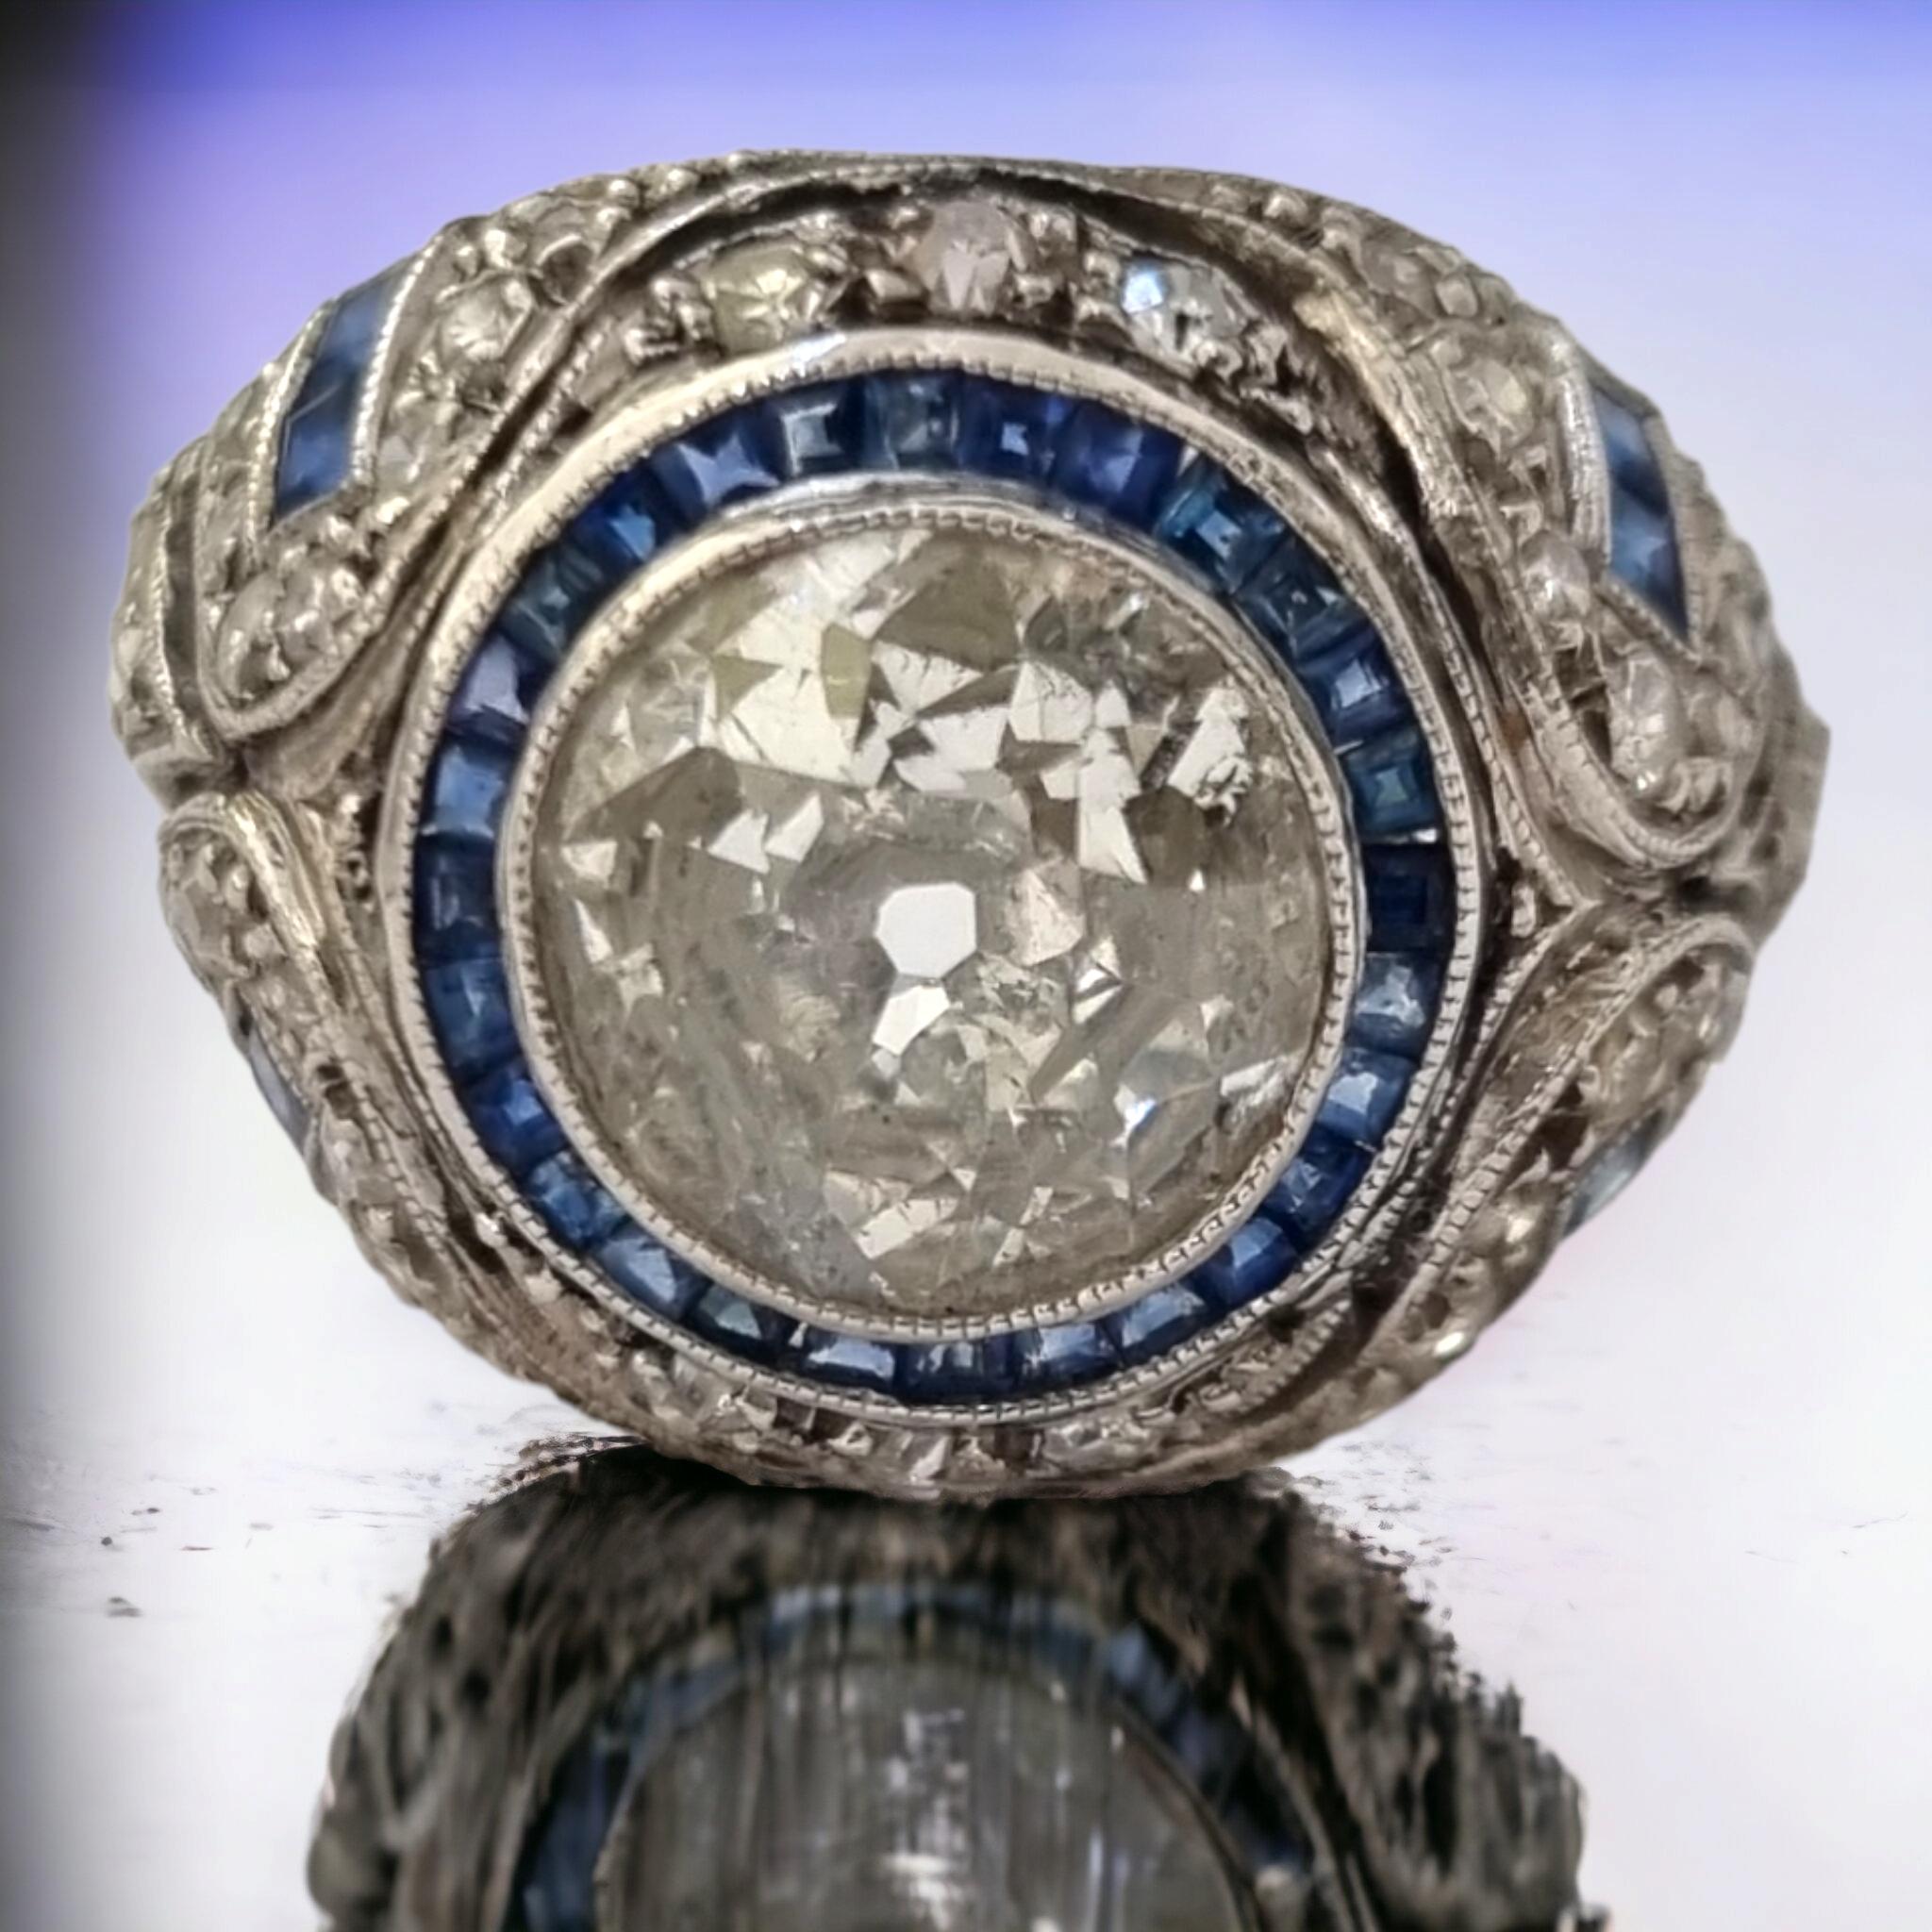 GIA certified Antique Art-Deco Diamond and Blue Sapphire Ring mounted in Platinum
Art Deco engagement ring, sizzles in the center with a bright-white and sparkling European-cut diamond weighting approx. 2.05 to 2.10 carats (8.15mmX7.95X4.20mm); J/K